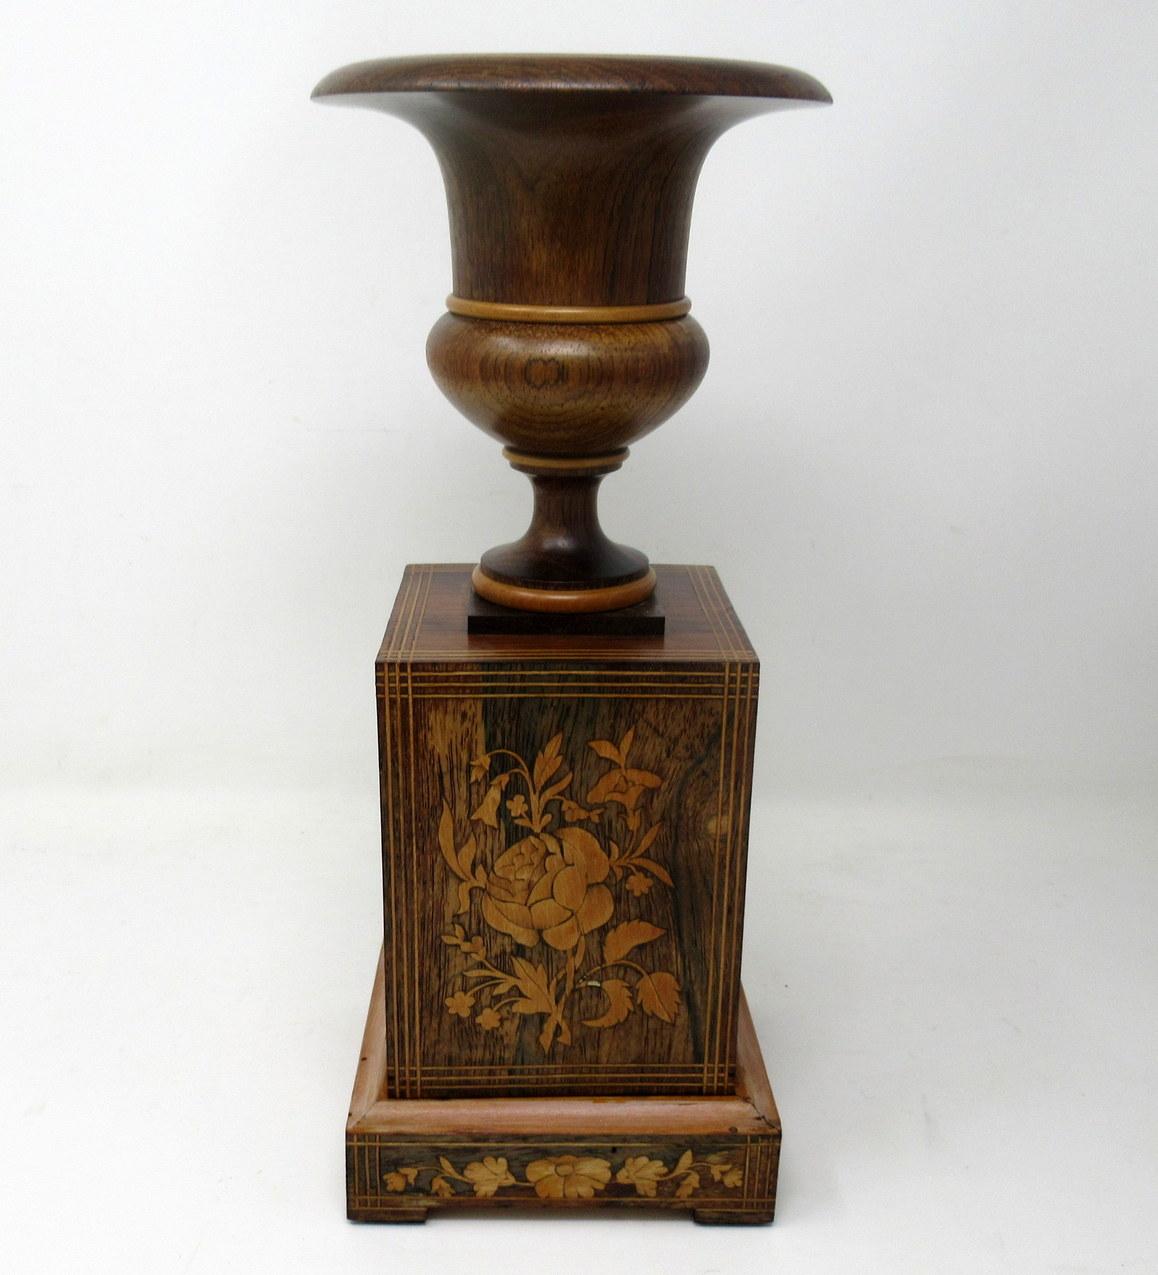 English Antique Vintage Pair Wooden Treen Carved Rosewood Candlesticks Urns Mid Century